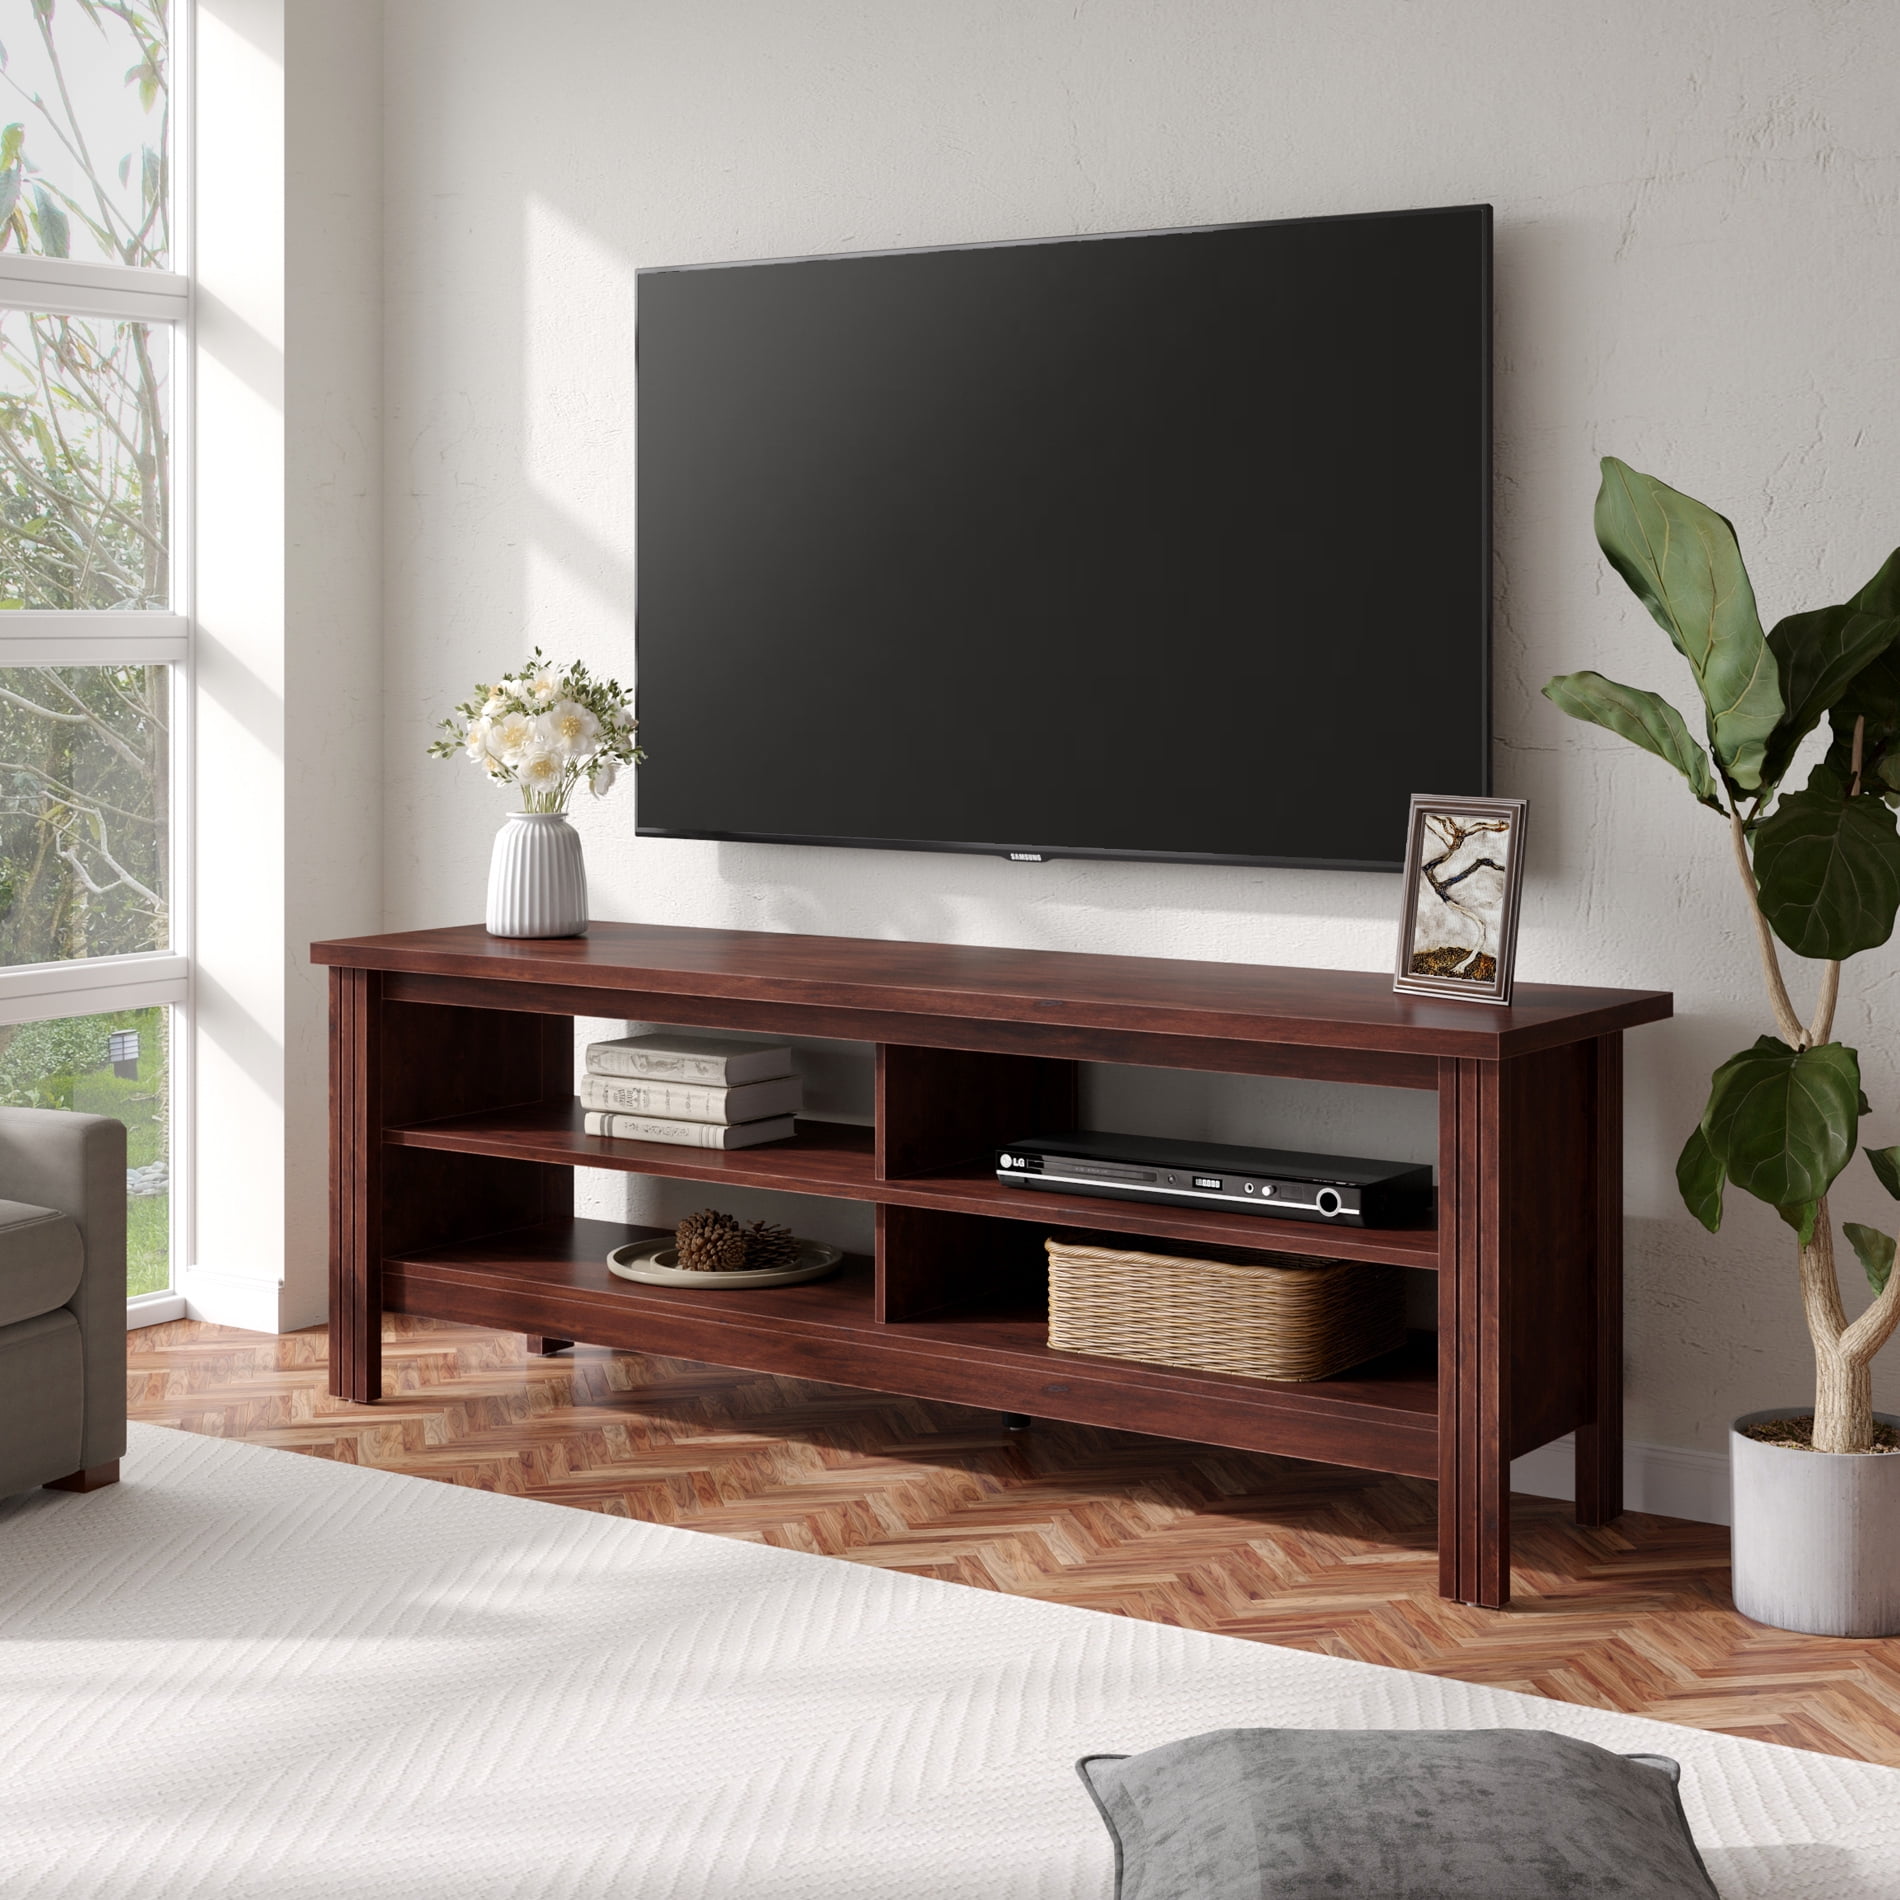 Espresso Wood TV Stand Console Storage Home Entertainment Display Cabinet Shelf 